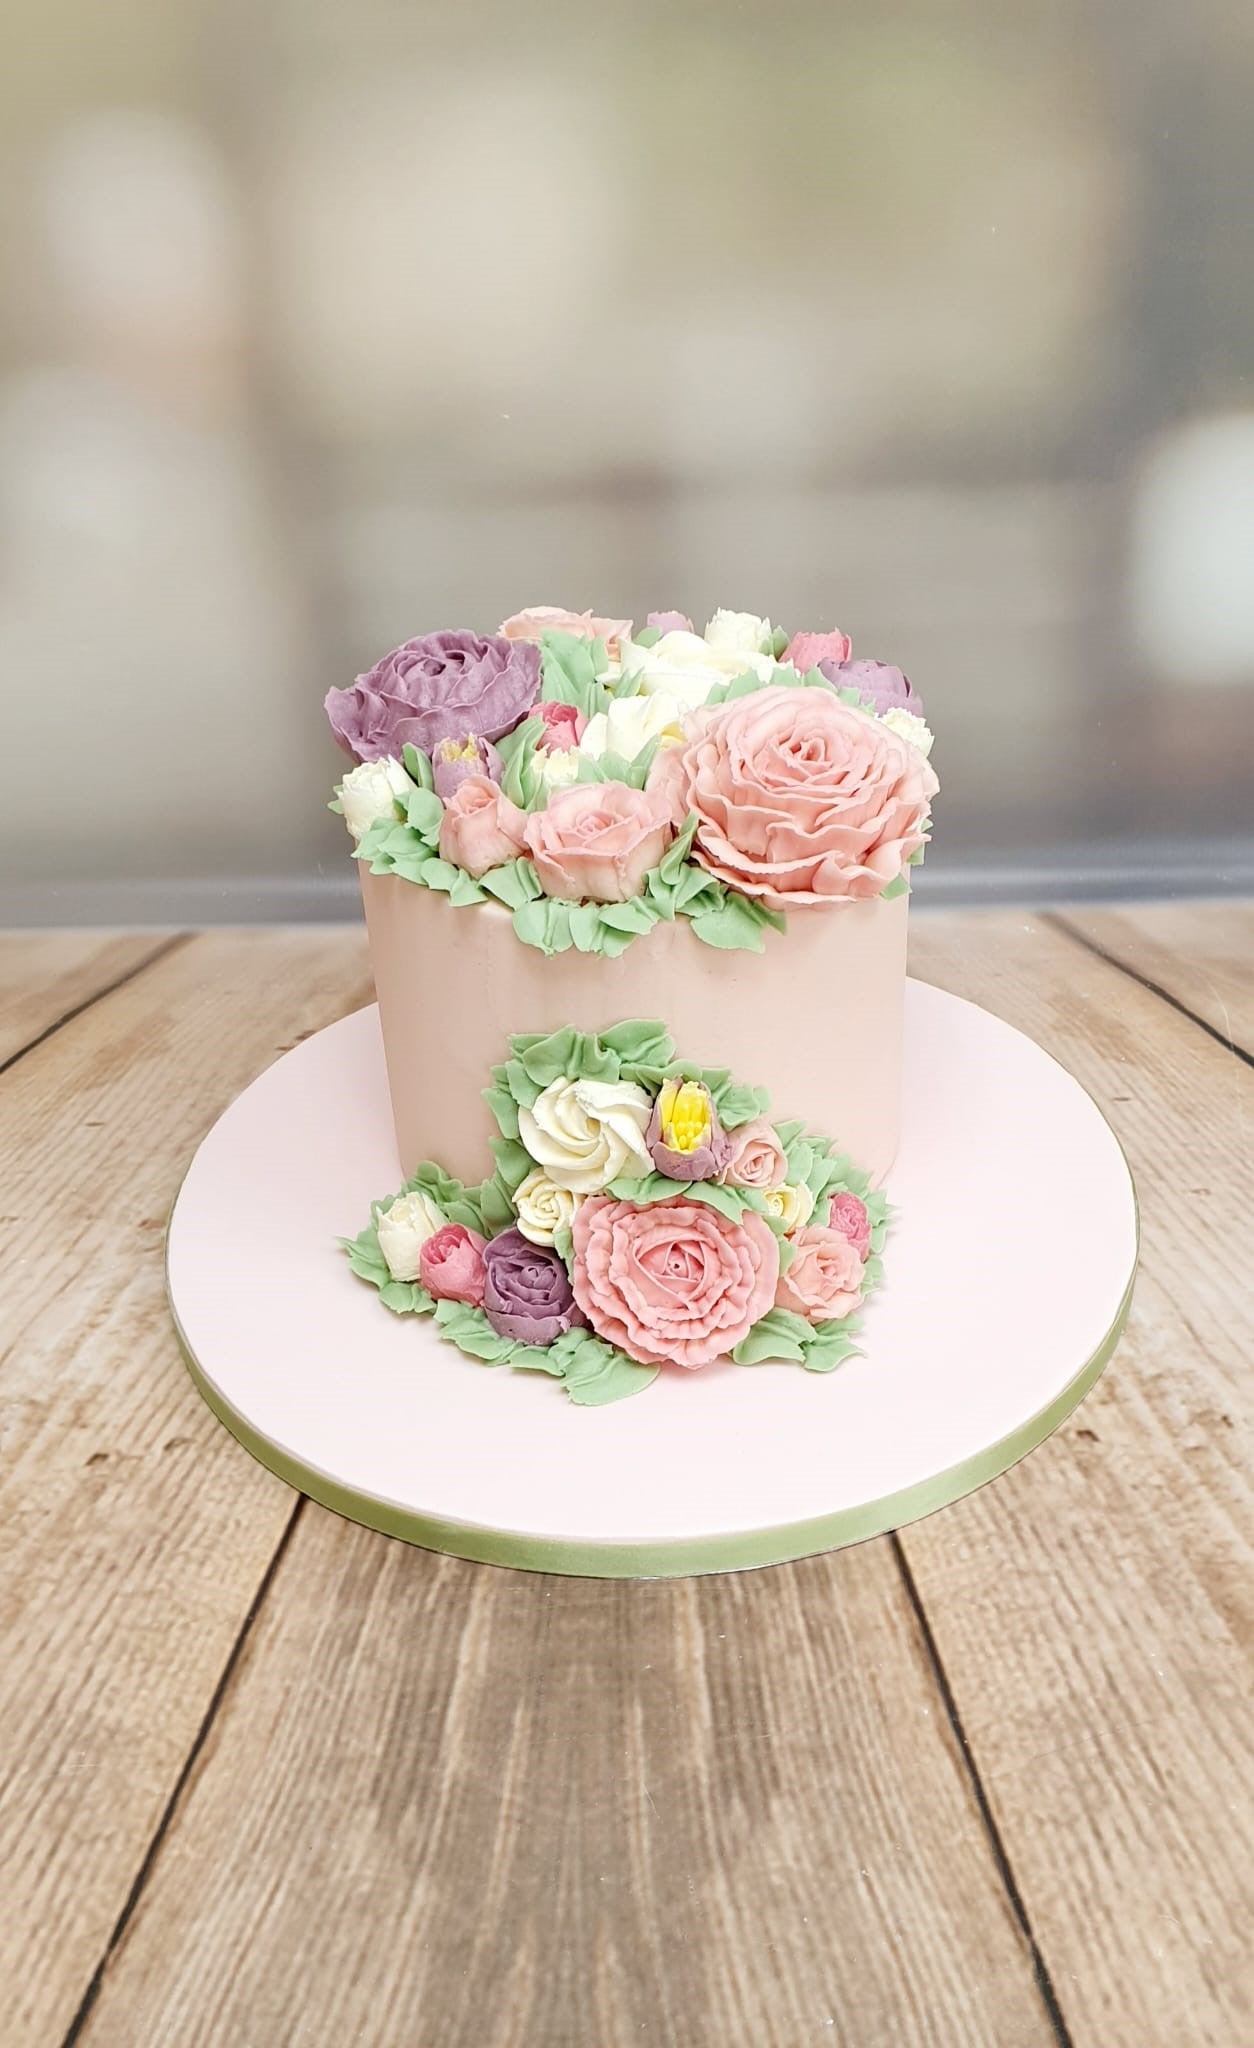 Fresh Flowers, Sugar Flowers and Buttercream Flowers on your Wedding C –  Yume Patisserie